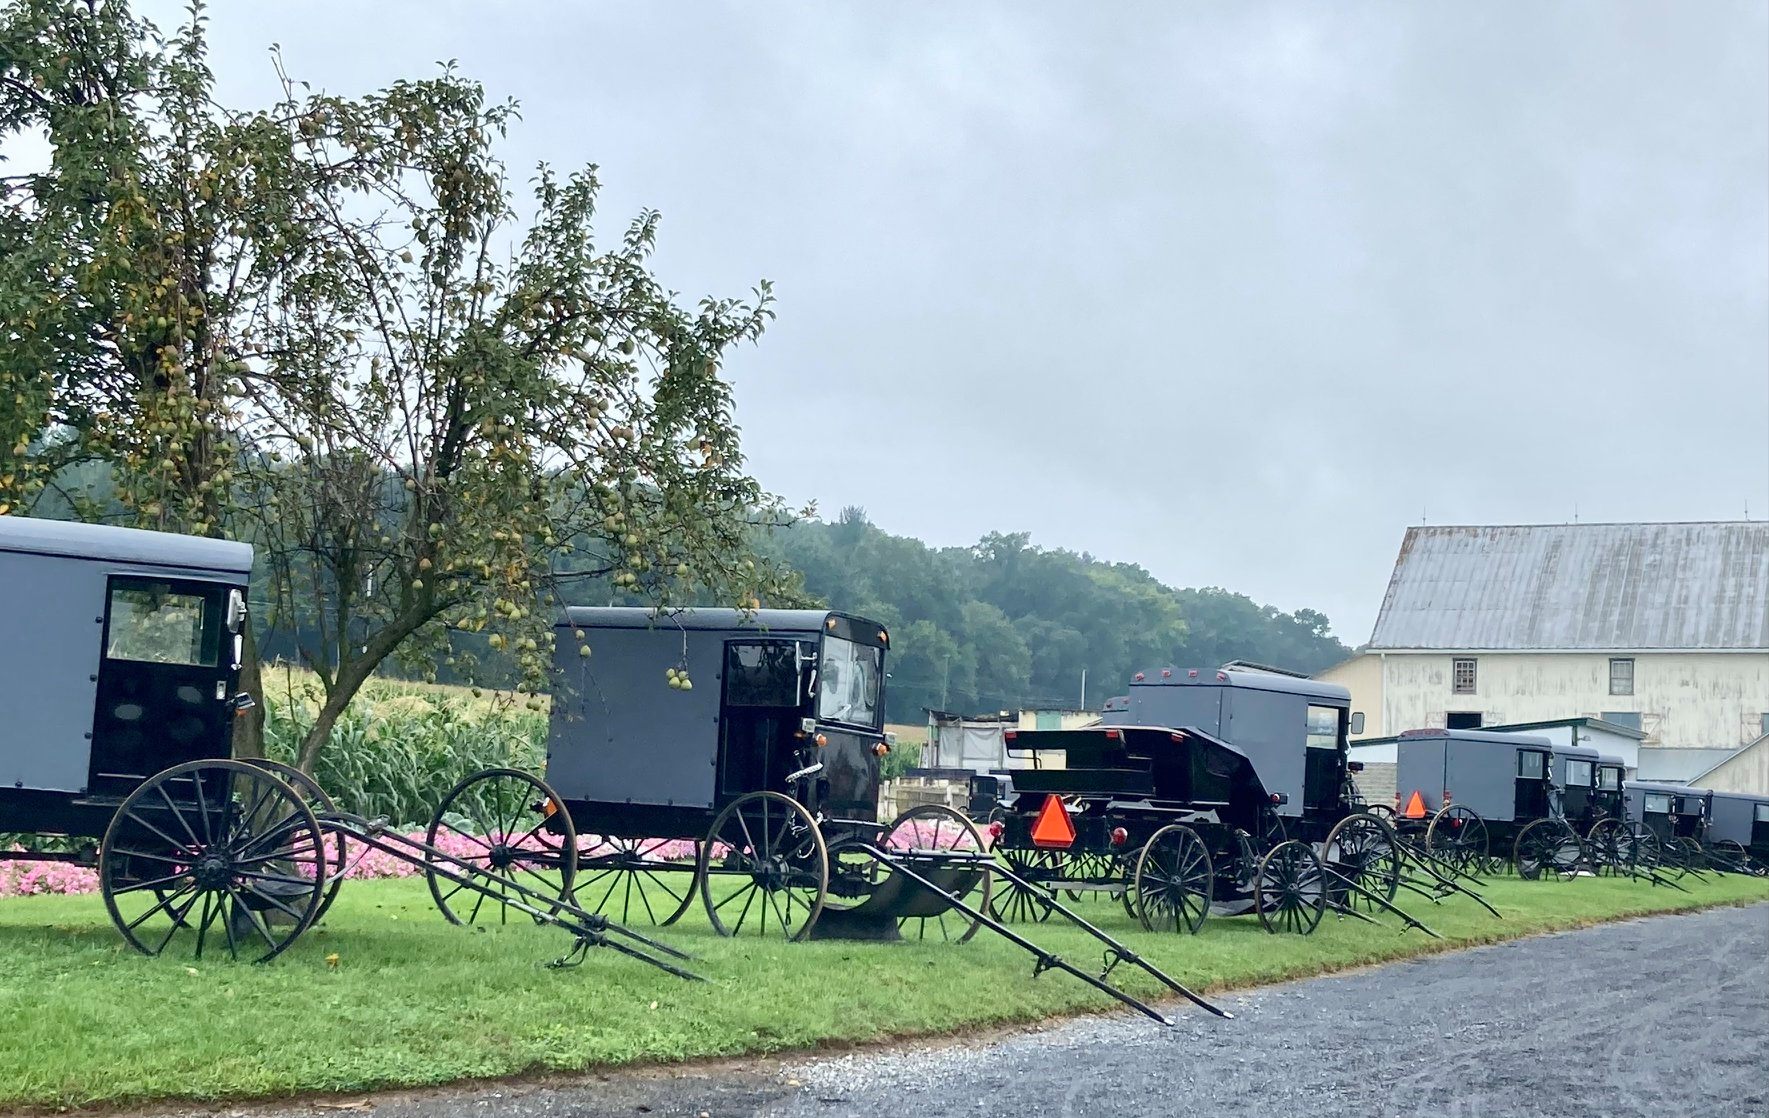 the amish farm and house